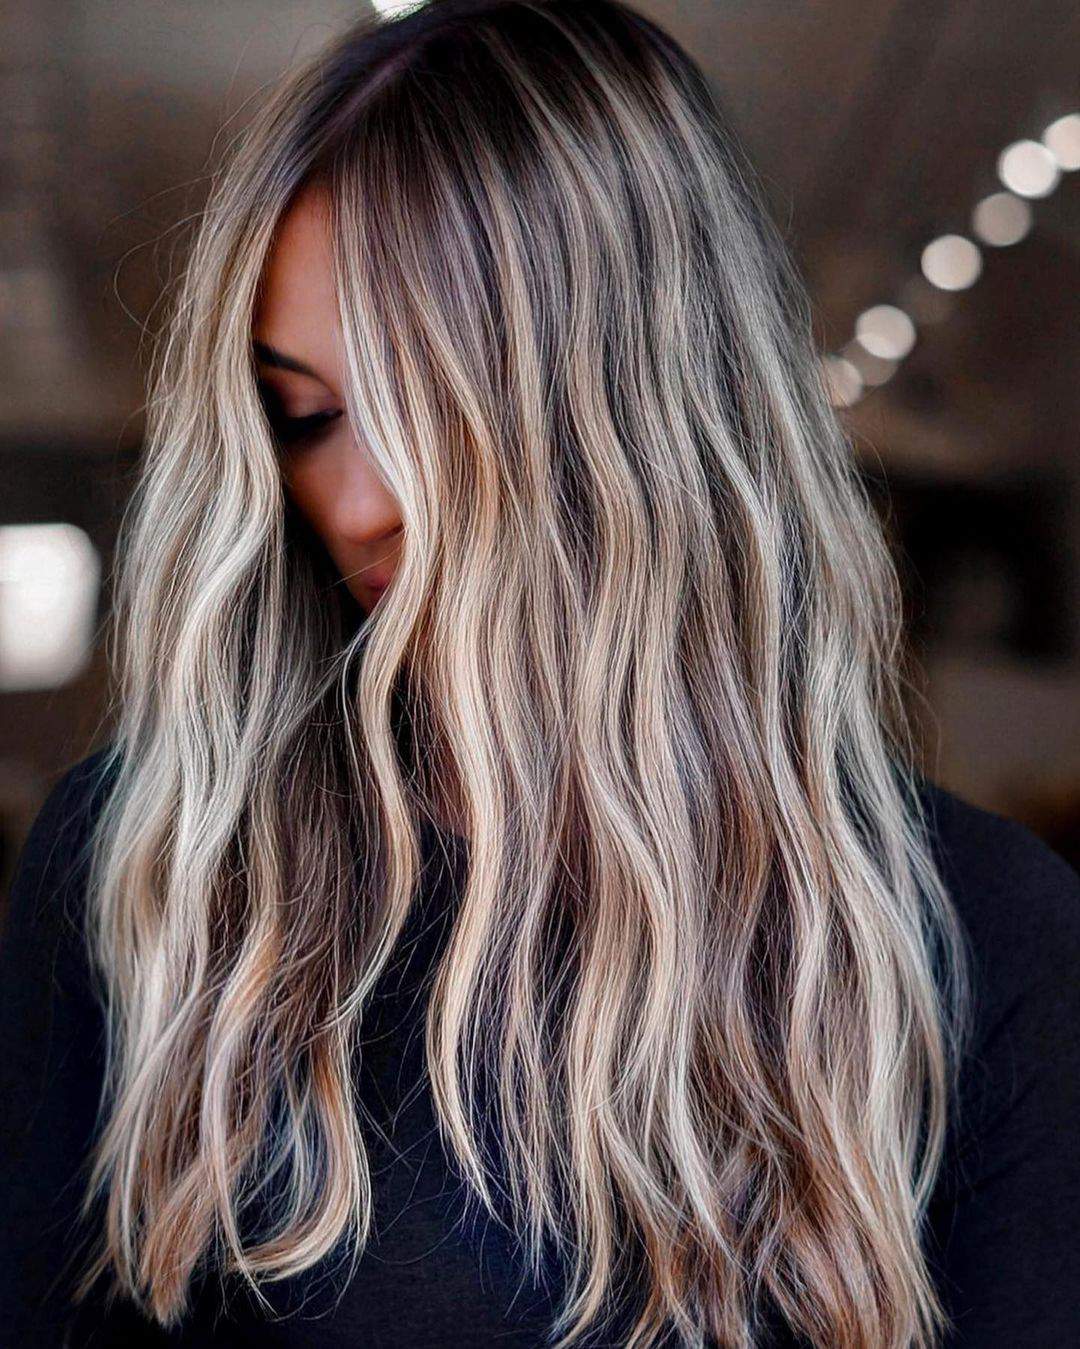 40 Greatest Long Hairstyles For Women With Long Hair In 2021 images 26